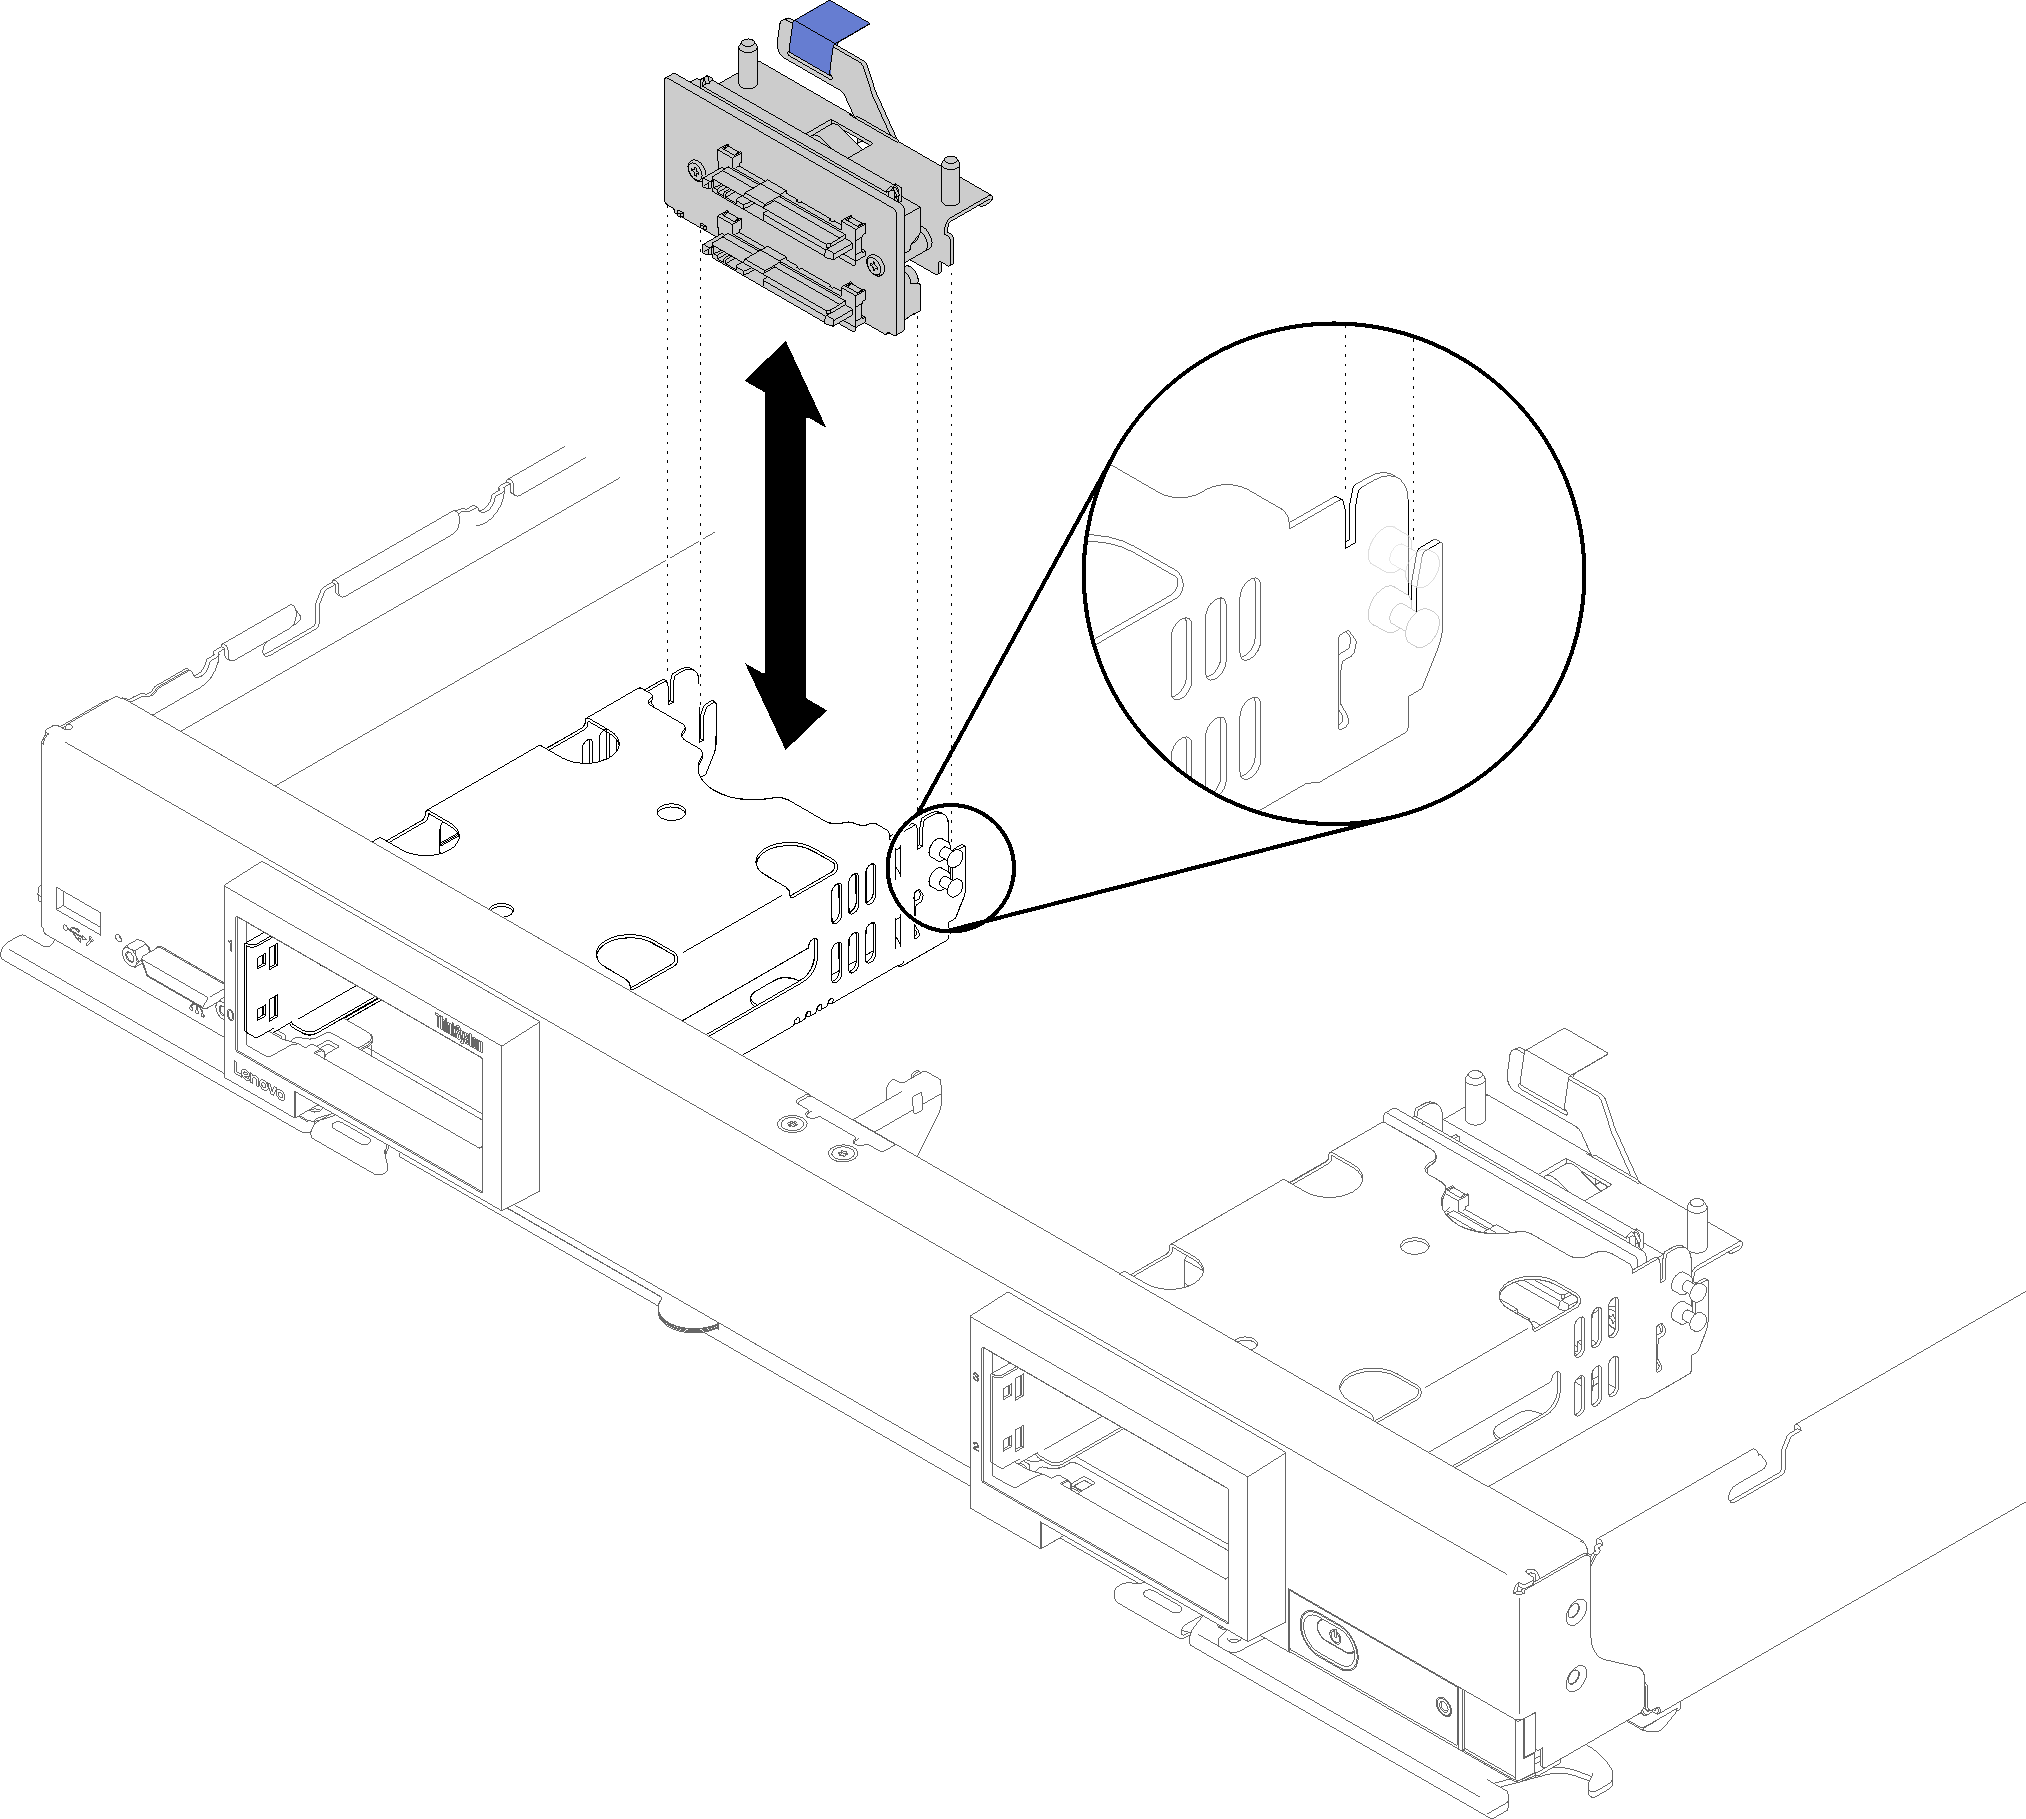 Graphic illustrating removing a drive backplane.